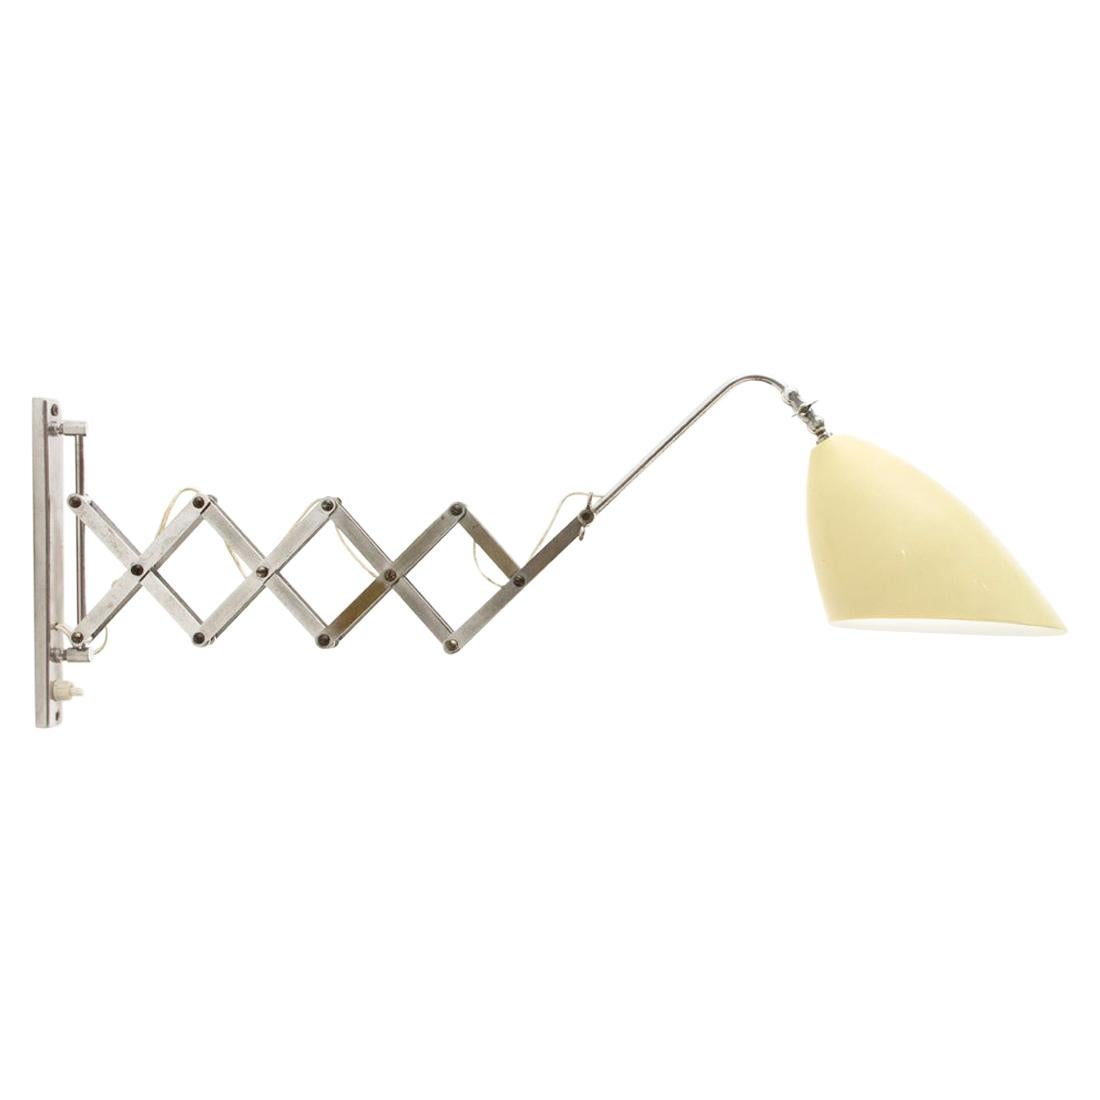 Chromed and Cream Italian Pantograph Wall Lamp, 1950s For Sale